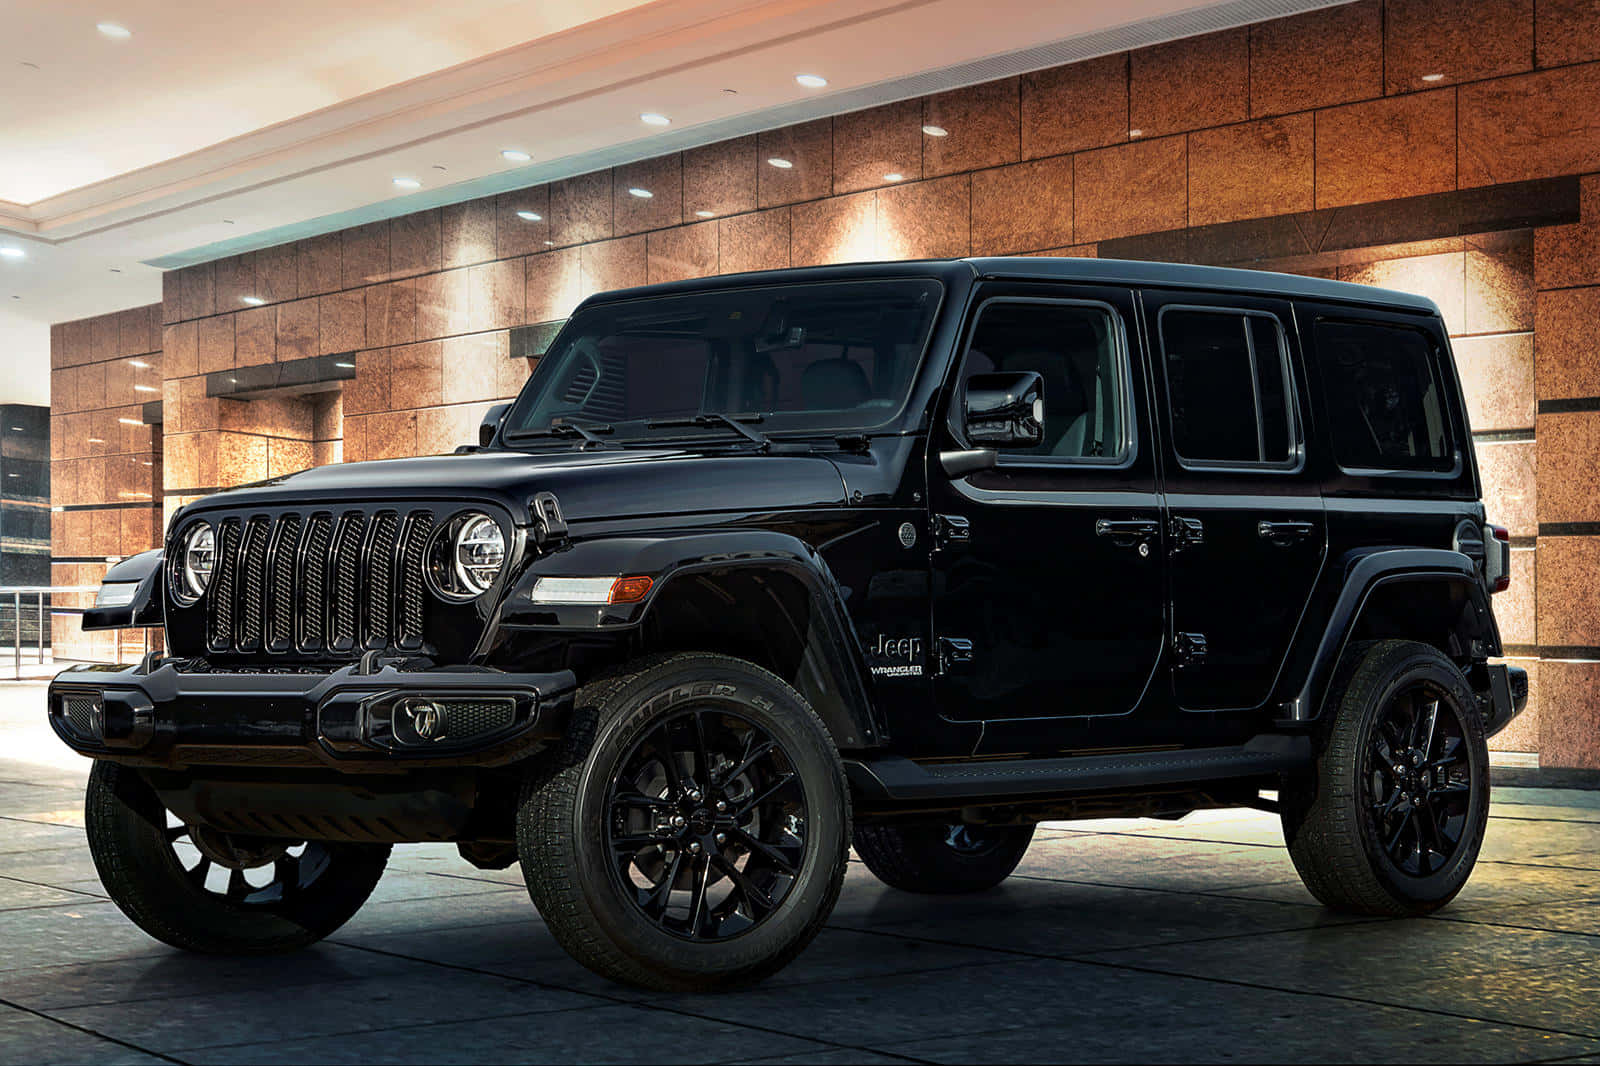 Off-road Ready: The Ruggedly Refined Jeep Wrangler